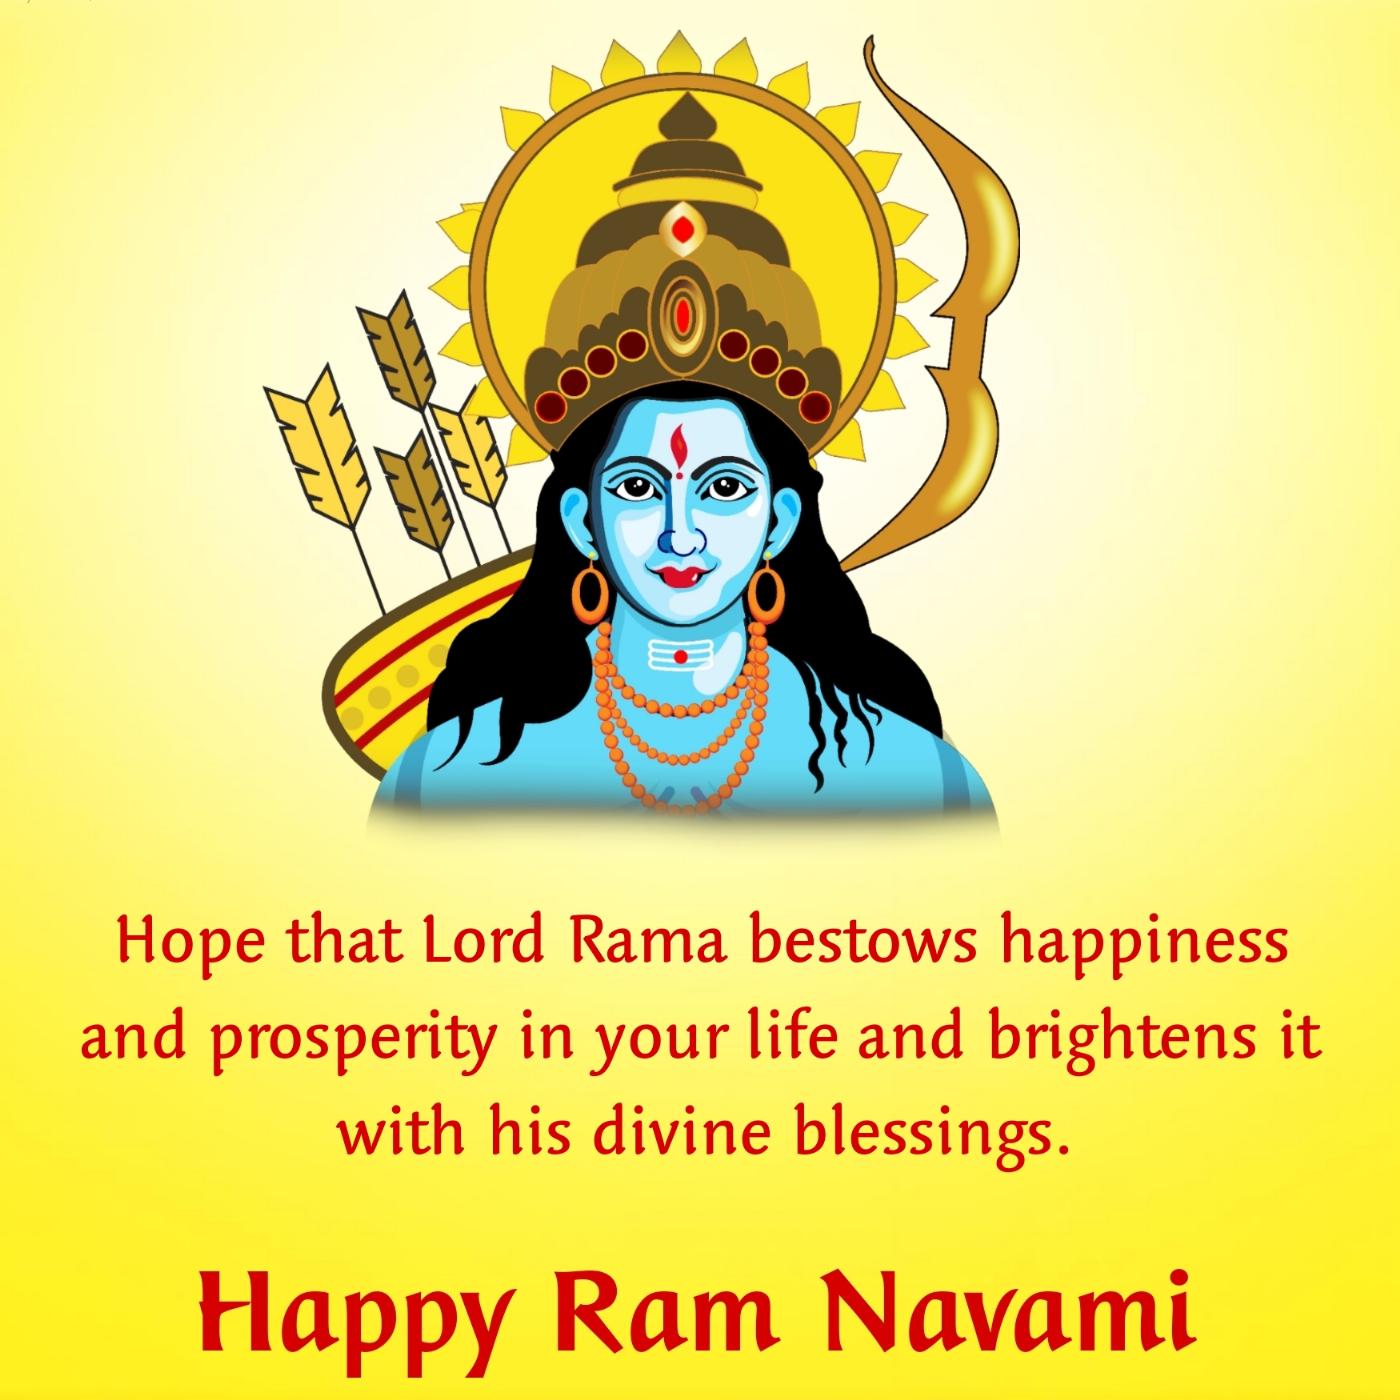 Hope that Lord Rama bestows happiness and prosperity